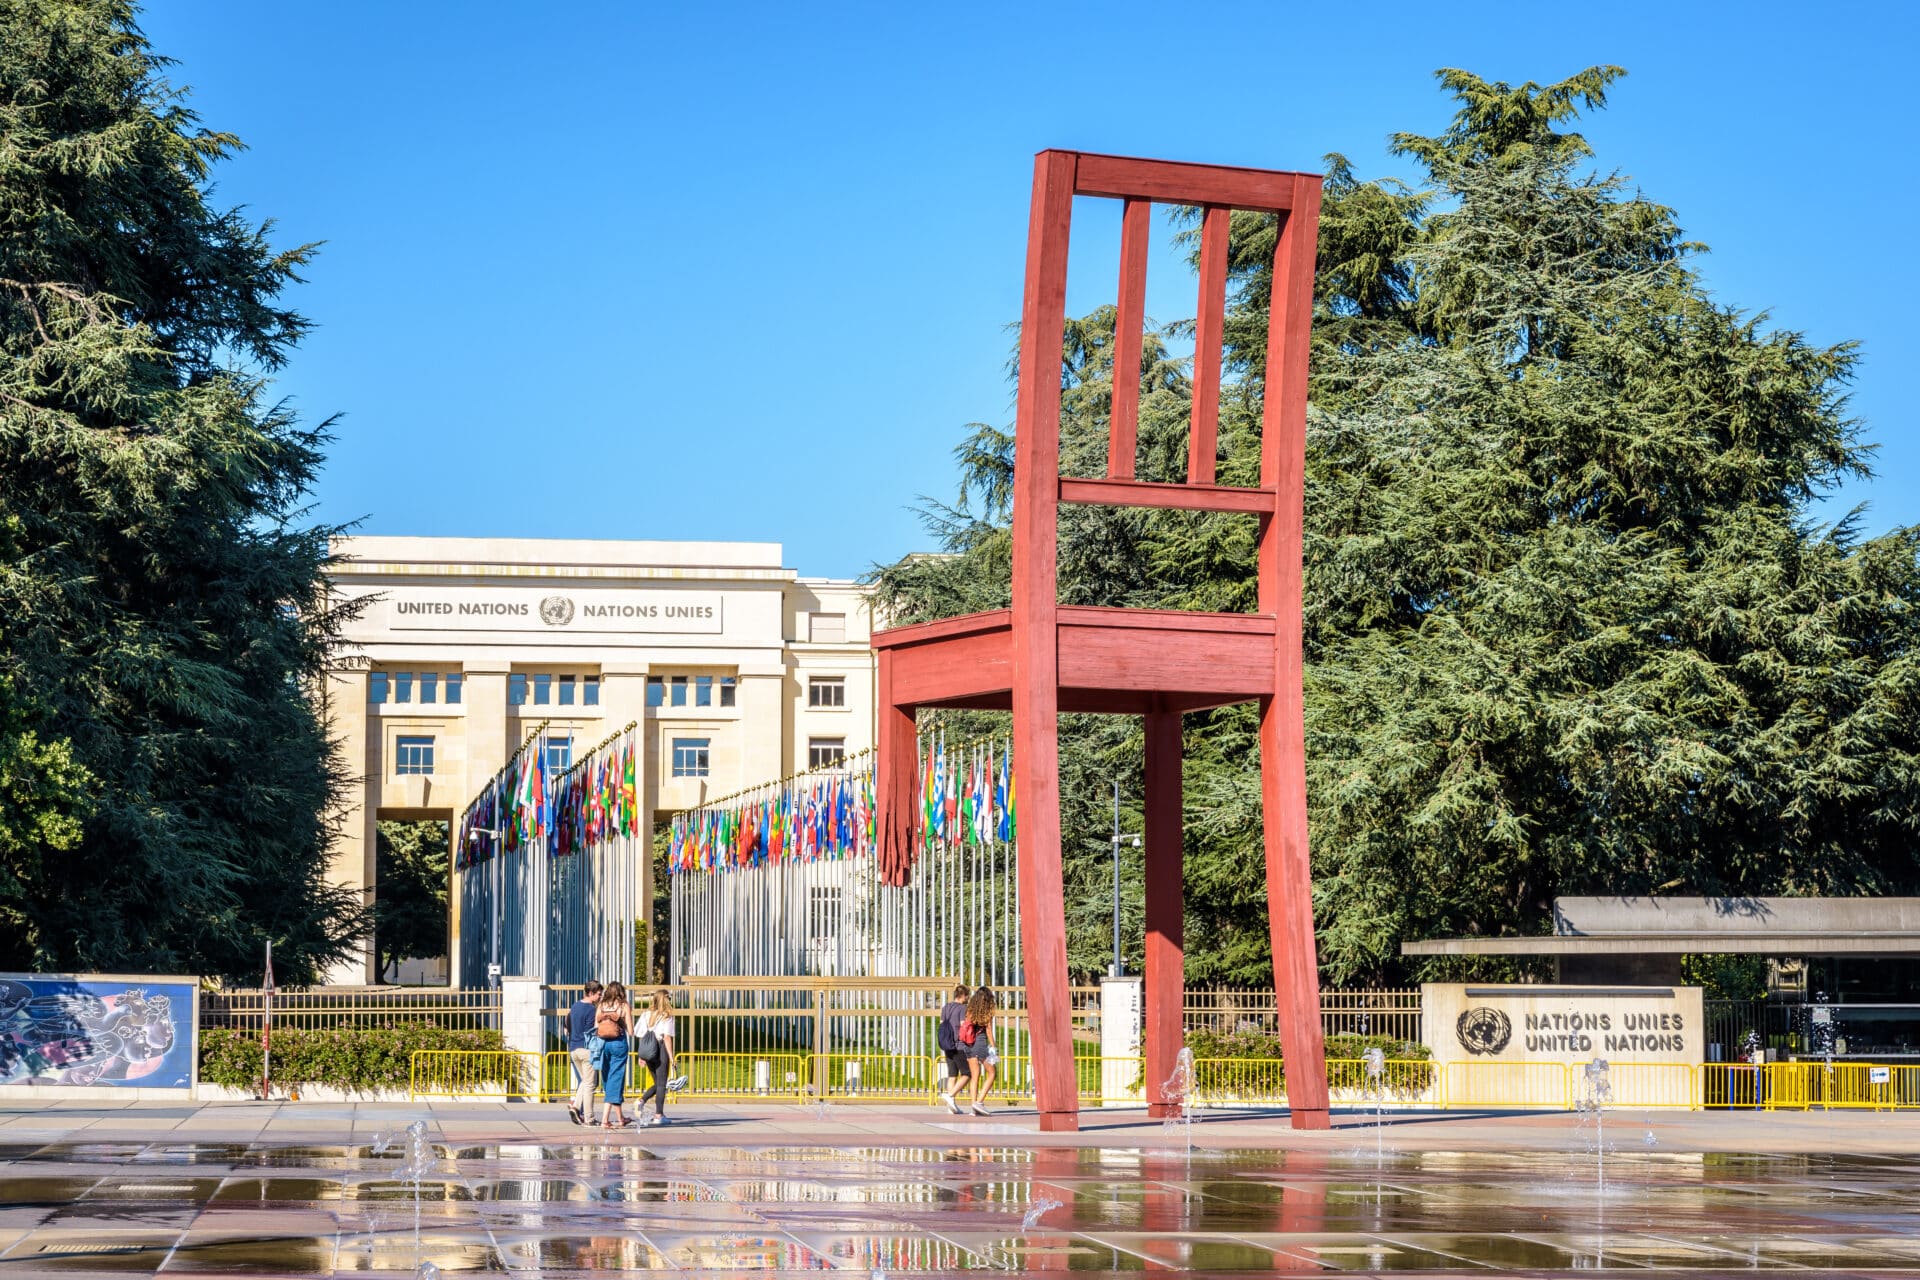 The "Broken Chair" sculpture, meant to commemorate opposition to land mines, was constructed in 1997 at the Palais des Nations, home of the United Nations Office in Geneva.